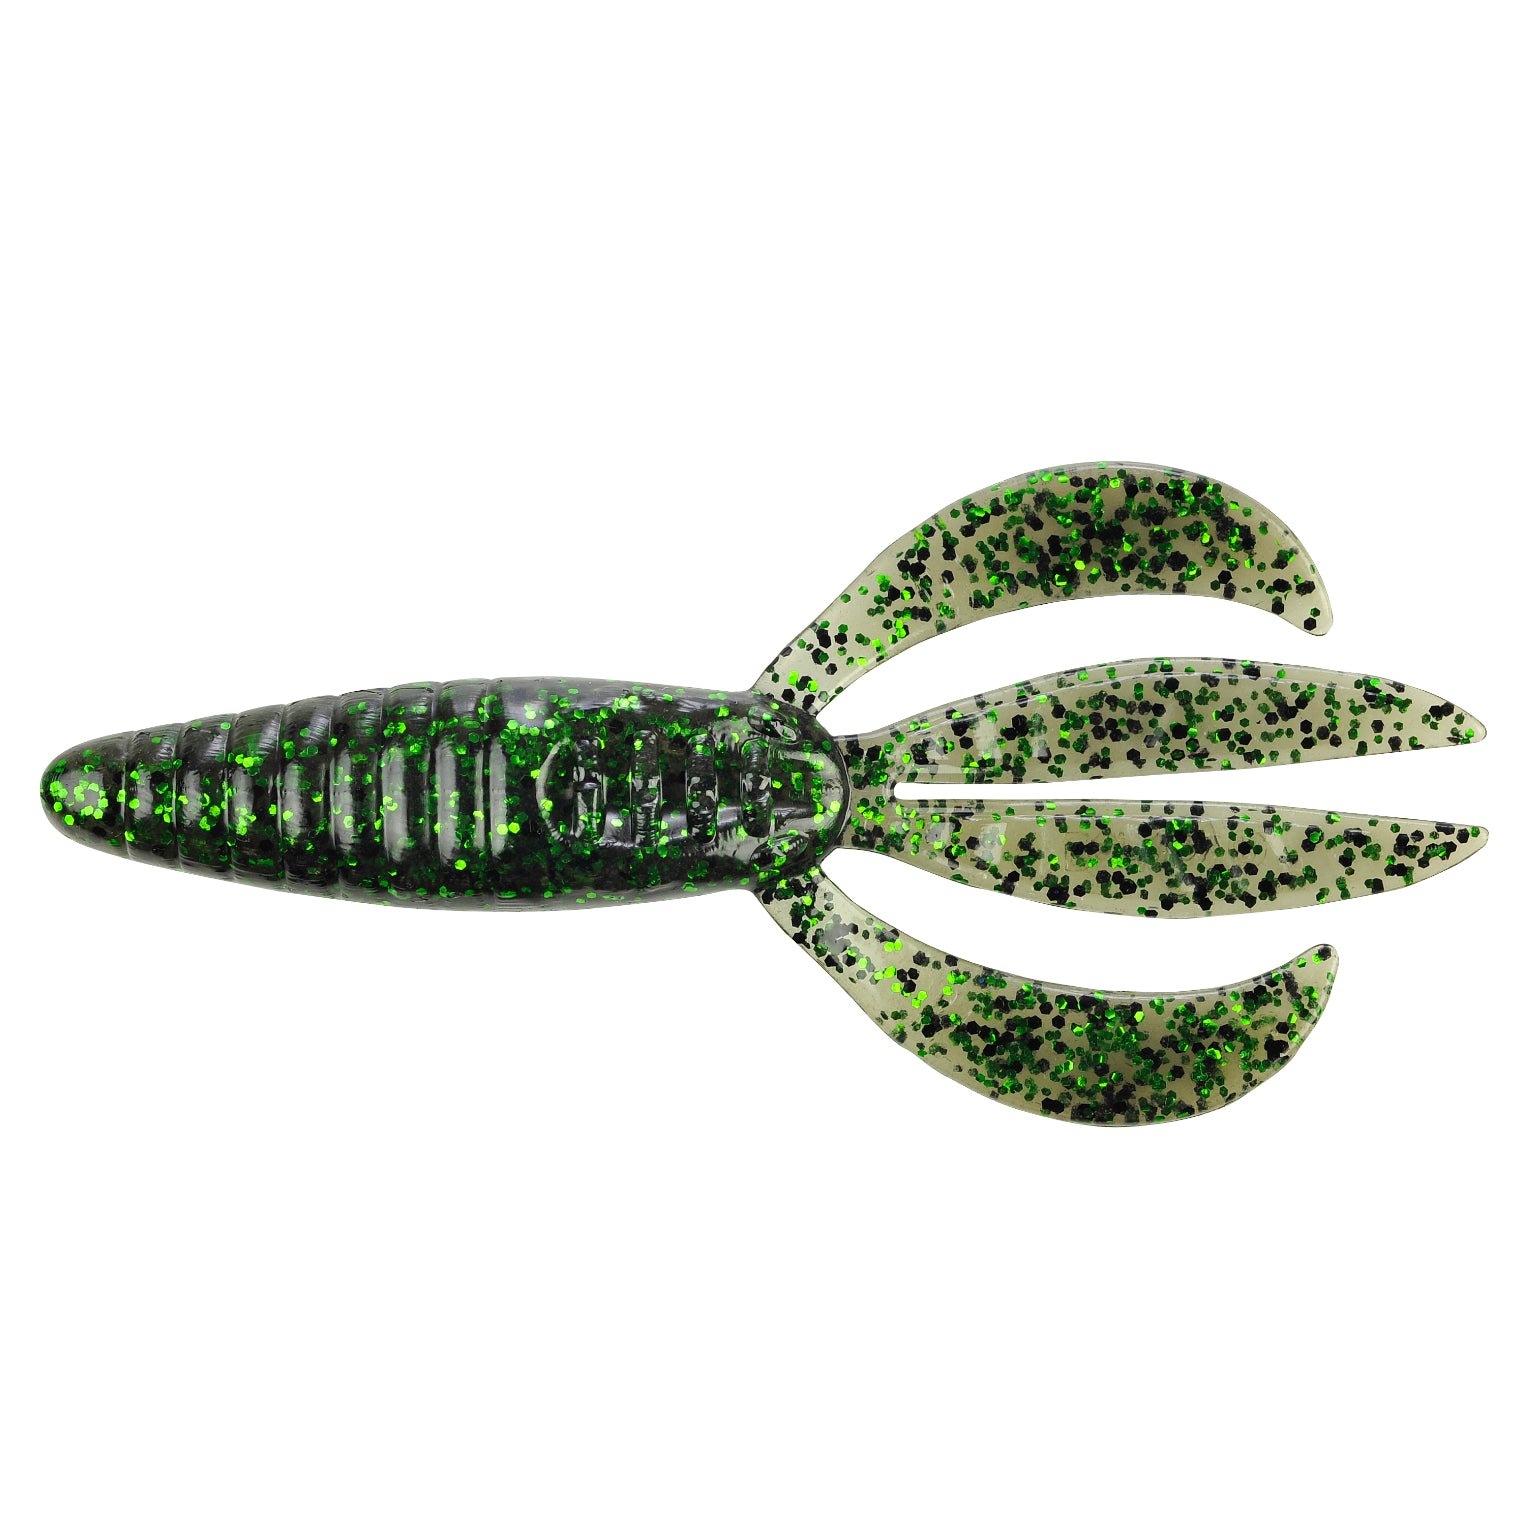 BERKLEY PIT BOSS - Copperstate Tackle